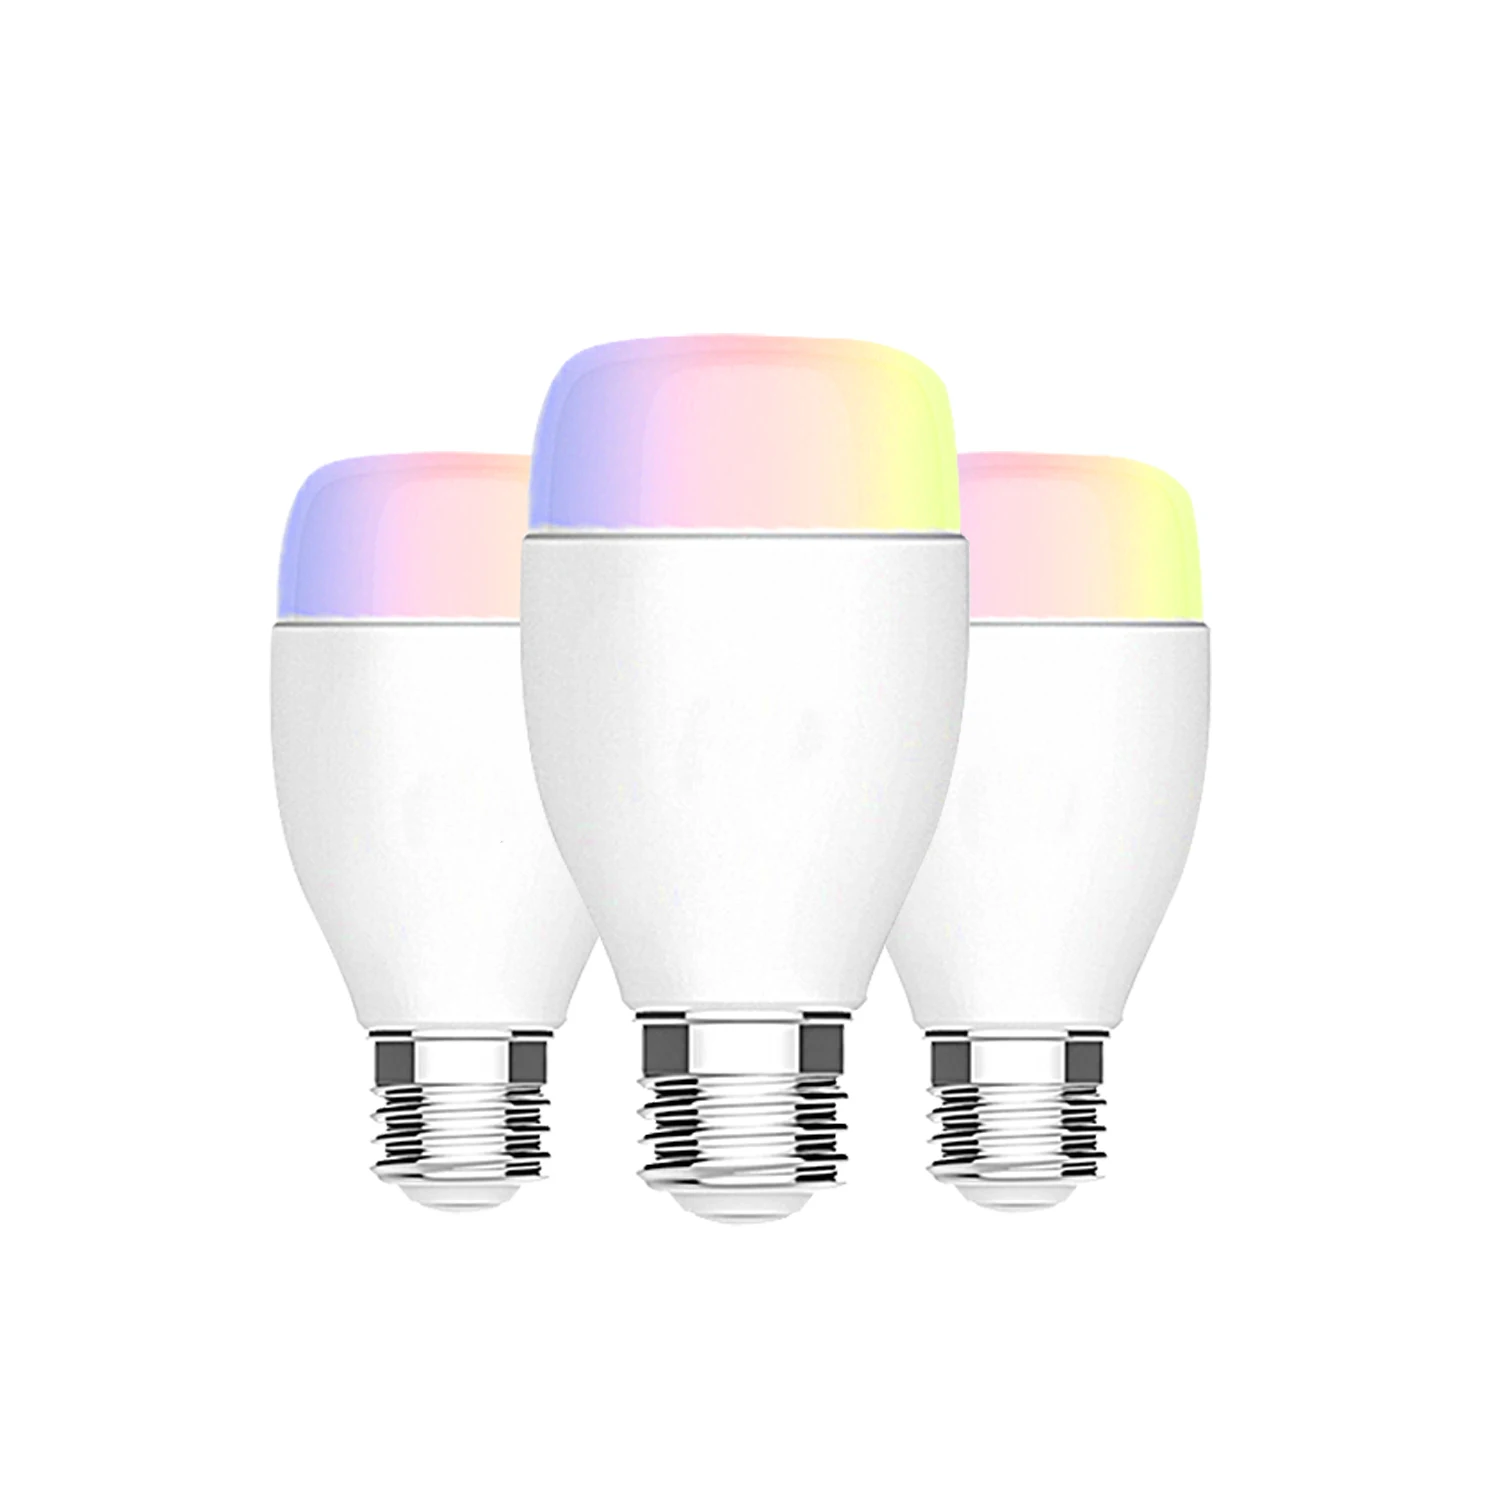 Smart Home IOT System With Intelligent Colored Led Smart Light Bulbs App Scenes